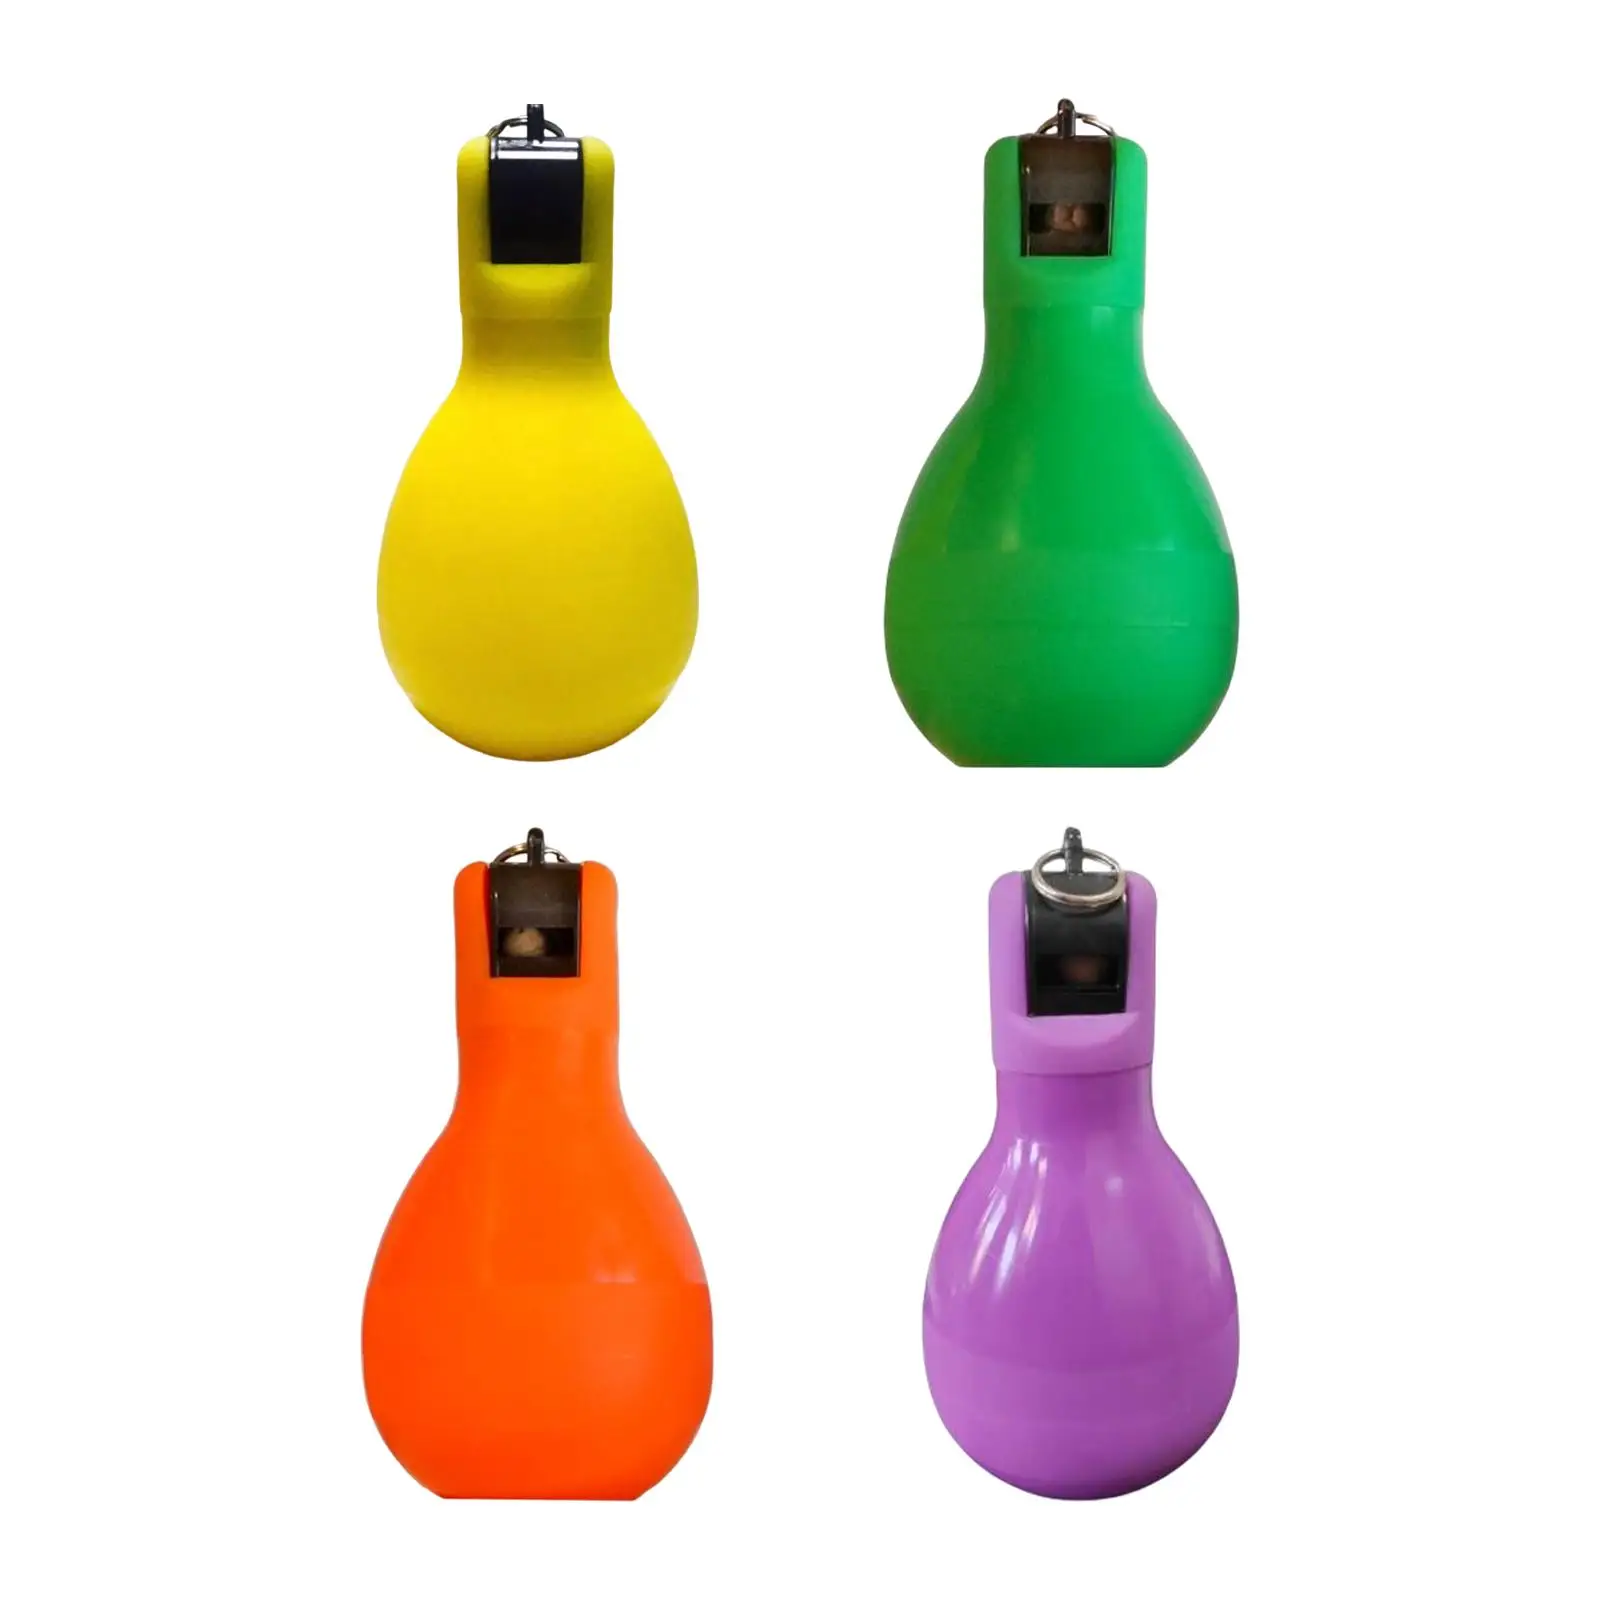 Outdoor Sports Whistle Portable Professional Handheld Hand Whistles for Teachers Emergency Basketball